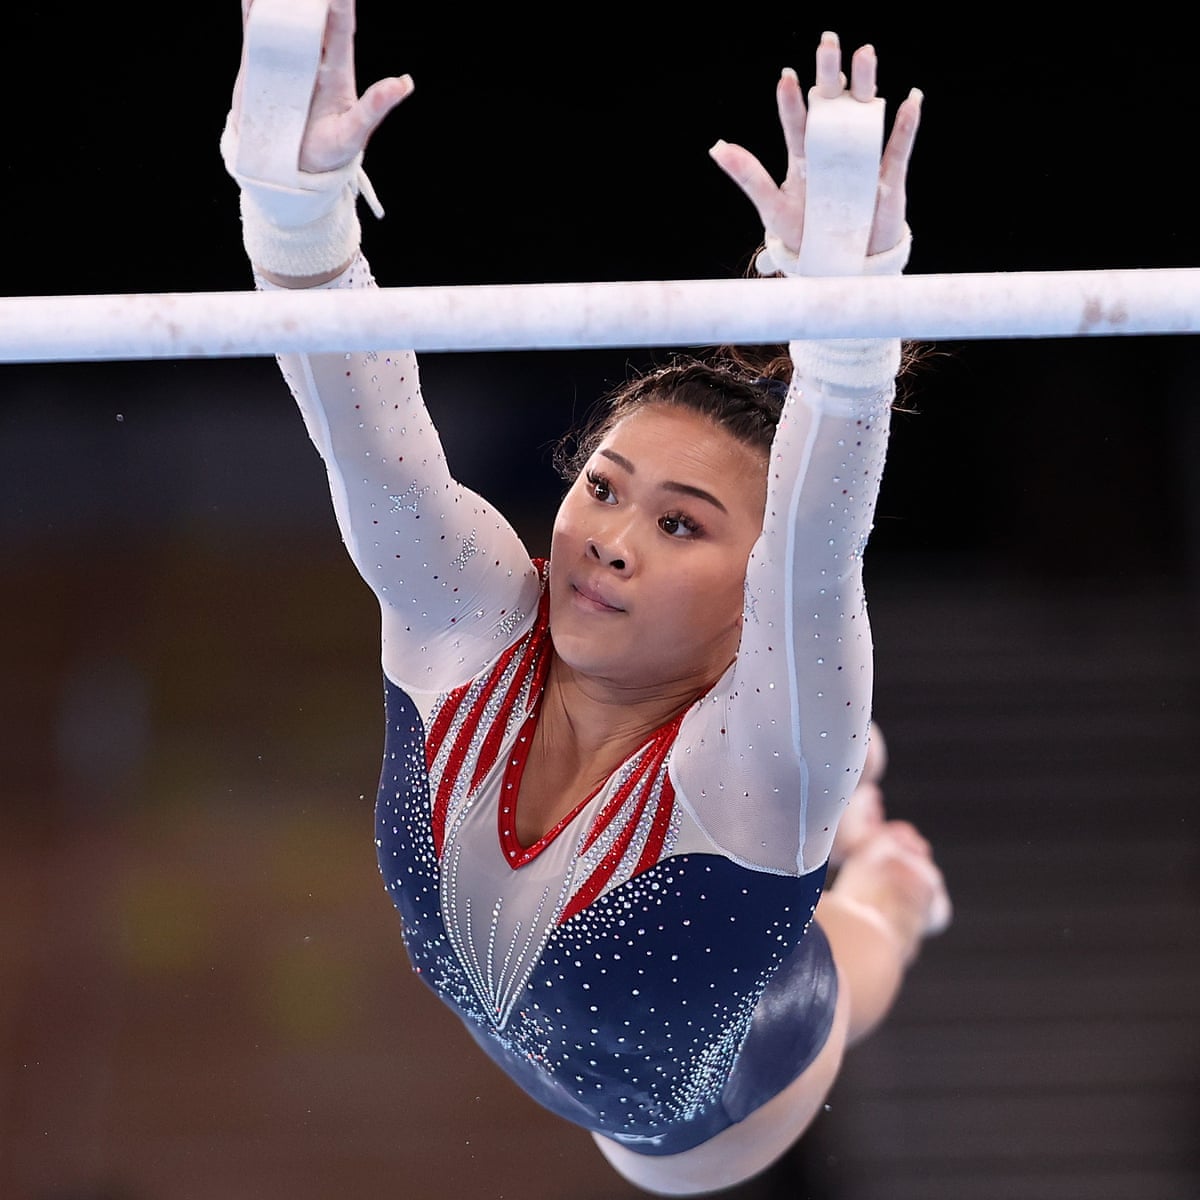 Simone Biles helped me to gold, says USA's Sunisa Lee after all-around win  | Tokyo Olympic Games 2020 | The Guardian